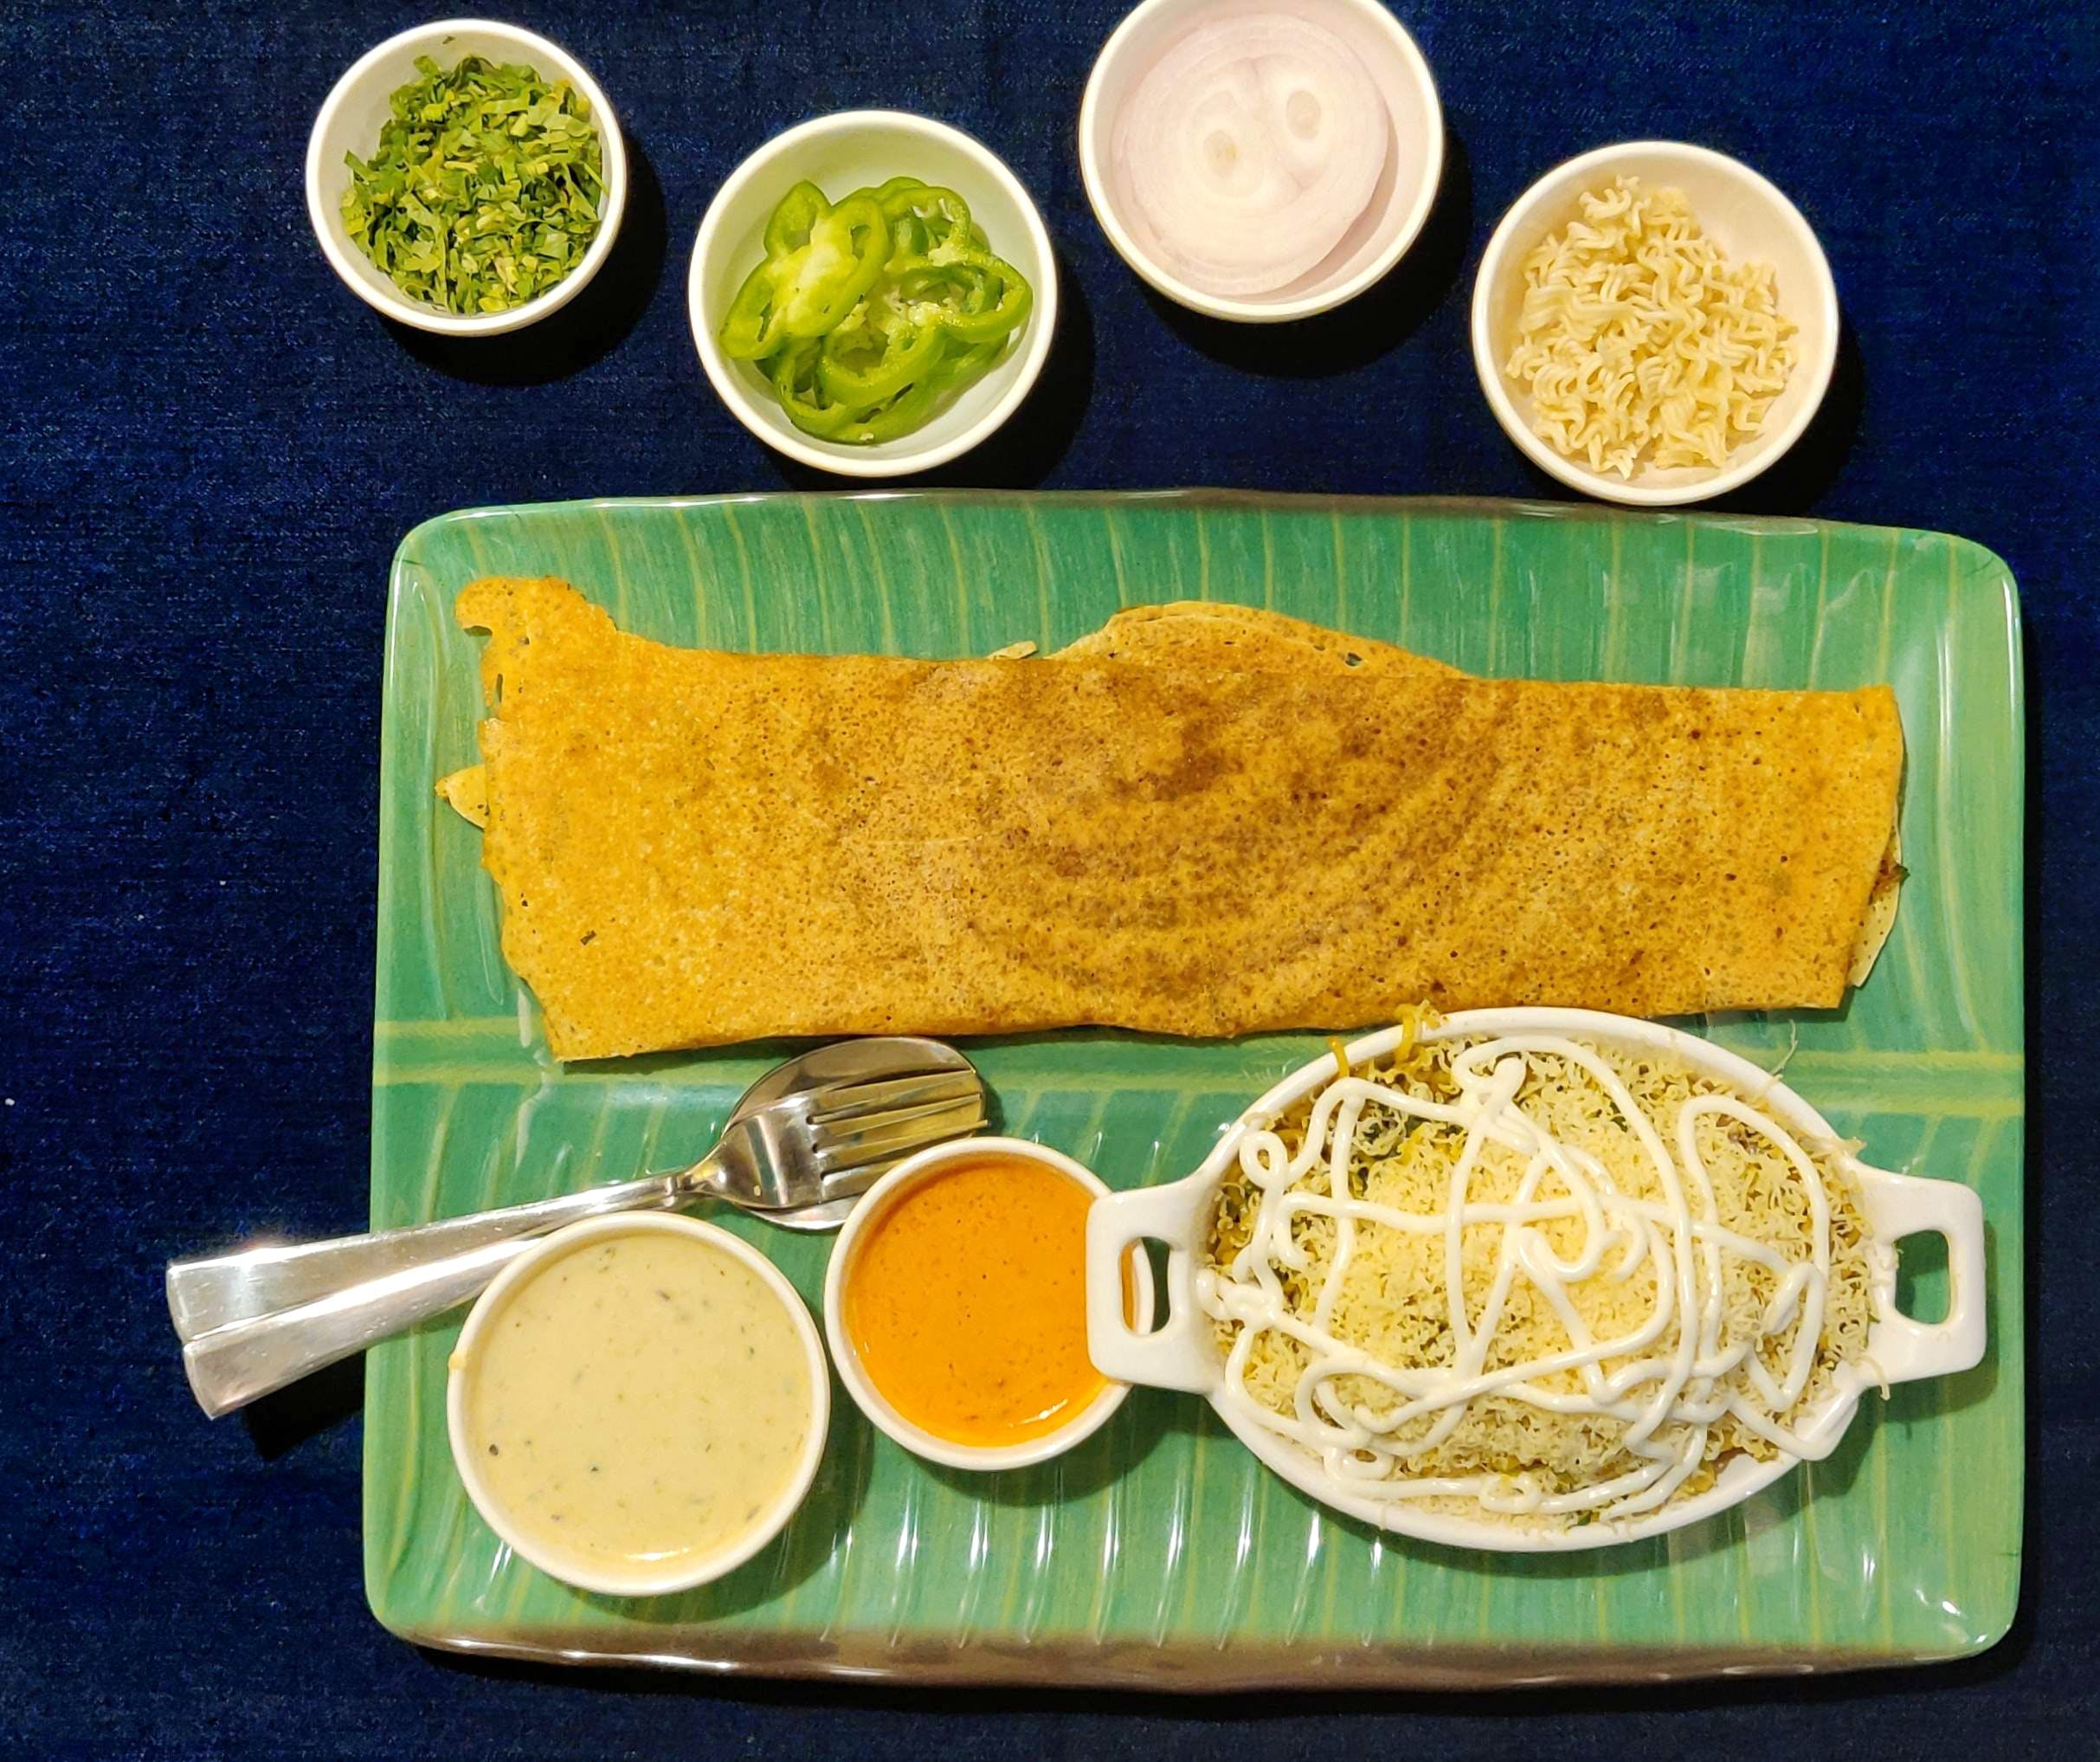 Cuisine,Food,Dish,Ingredient,Dosa,Indian cuisine,Meal,Produce,Soba,Recipe